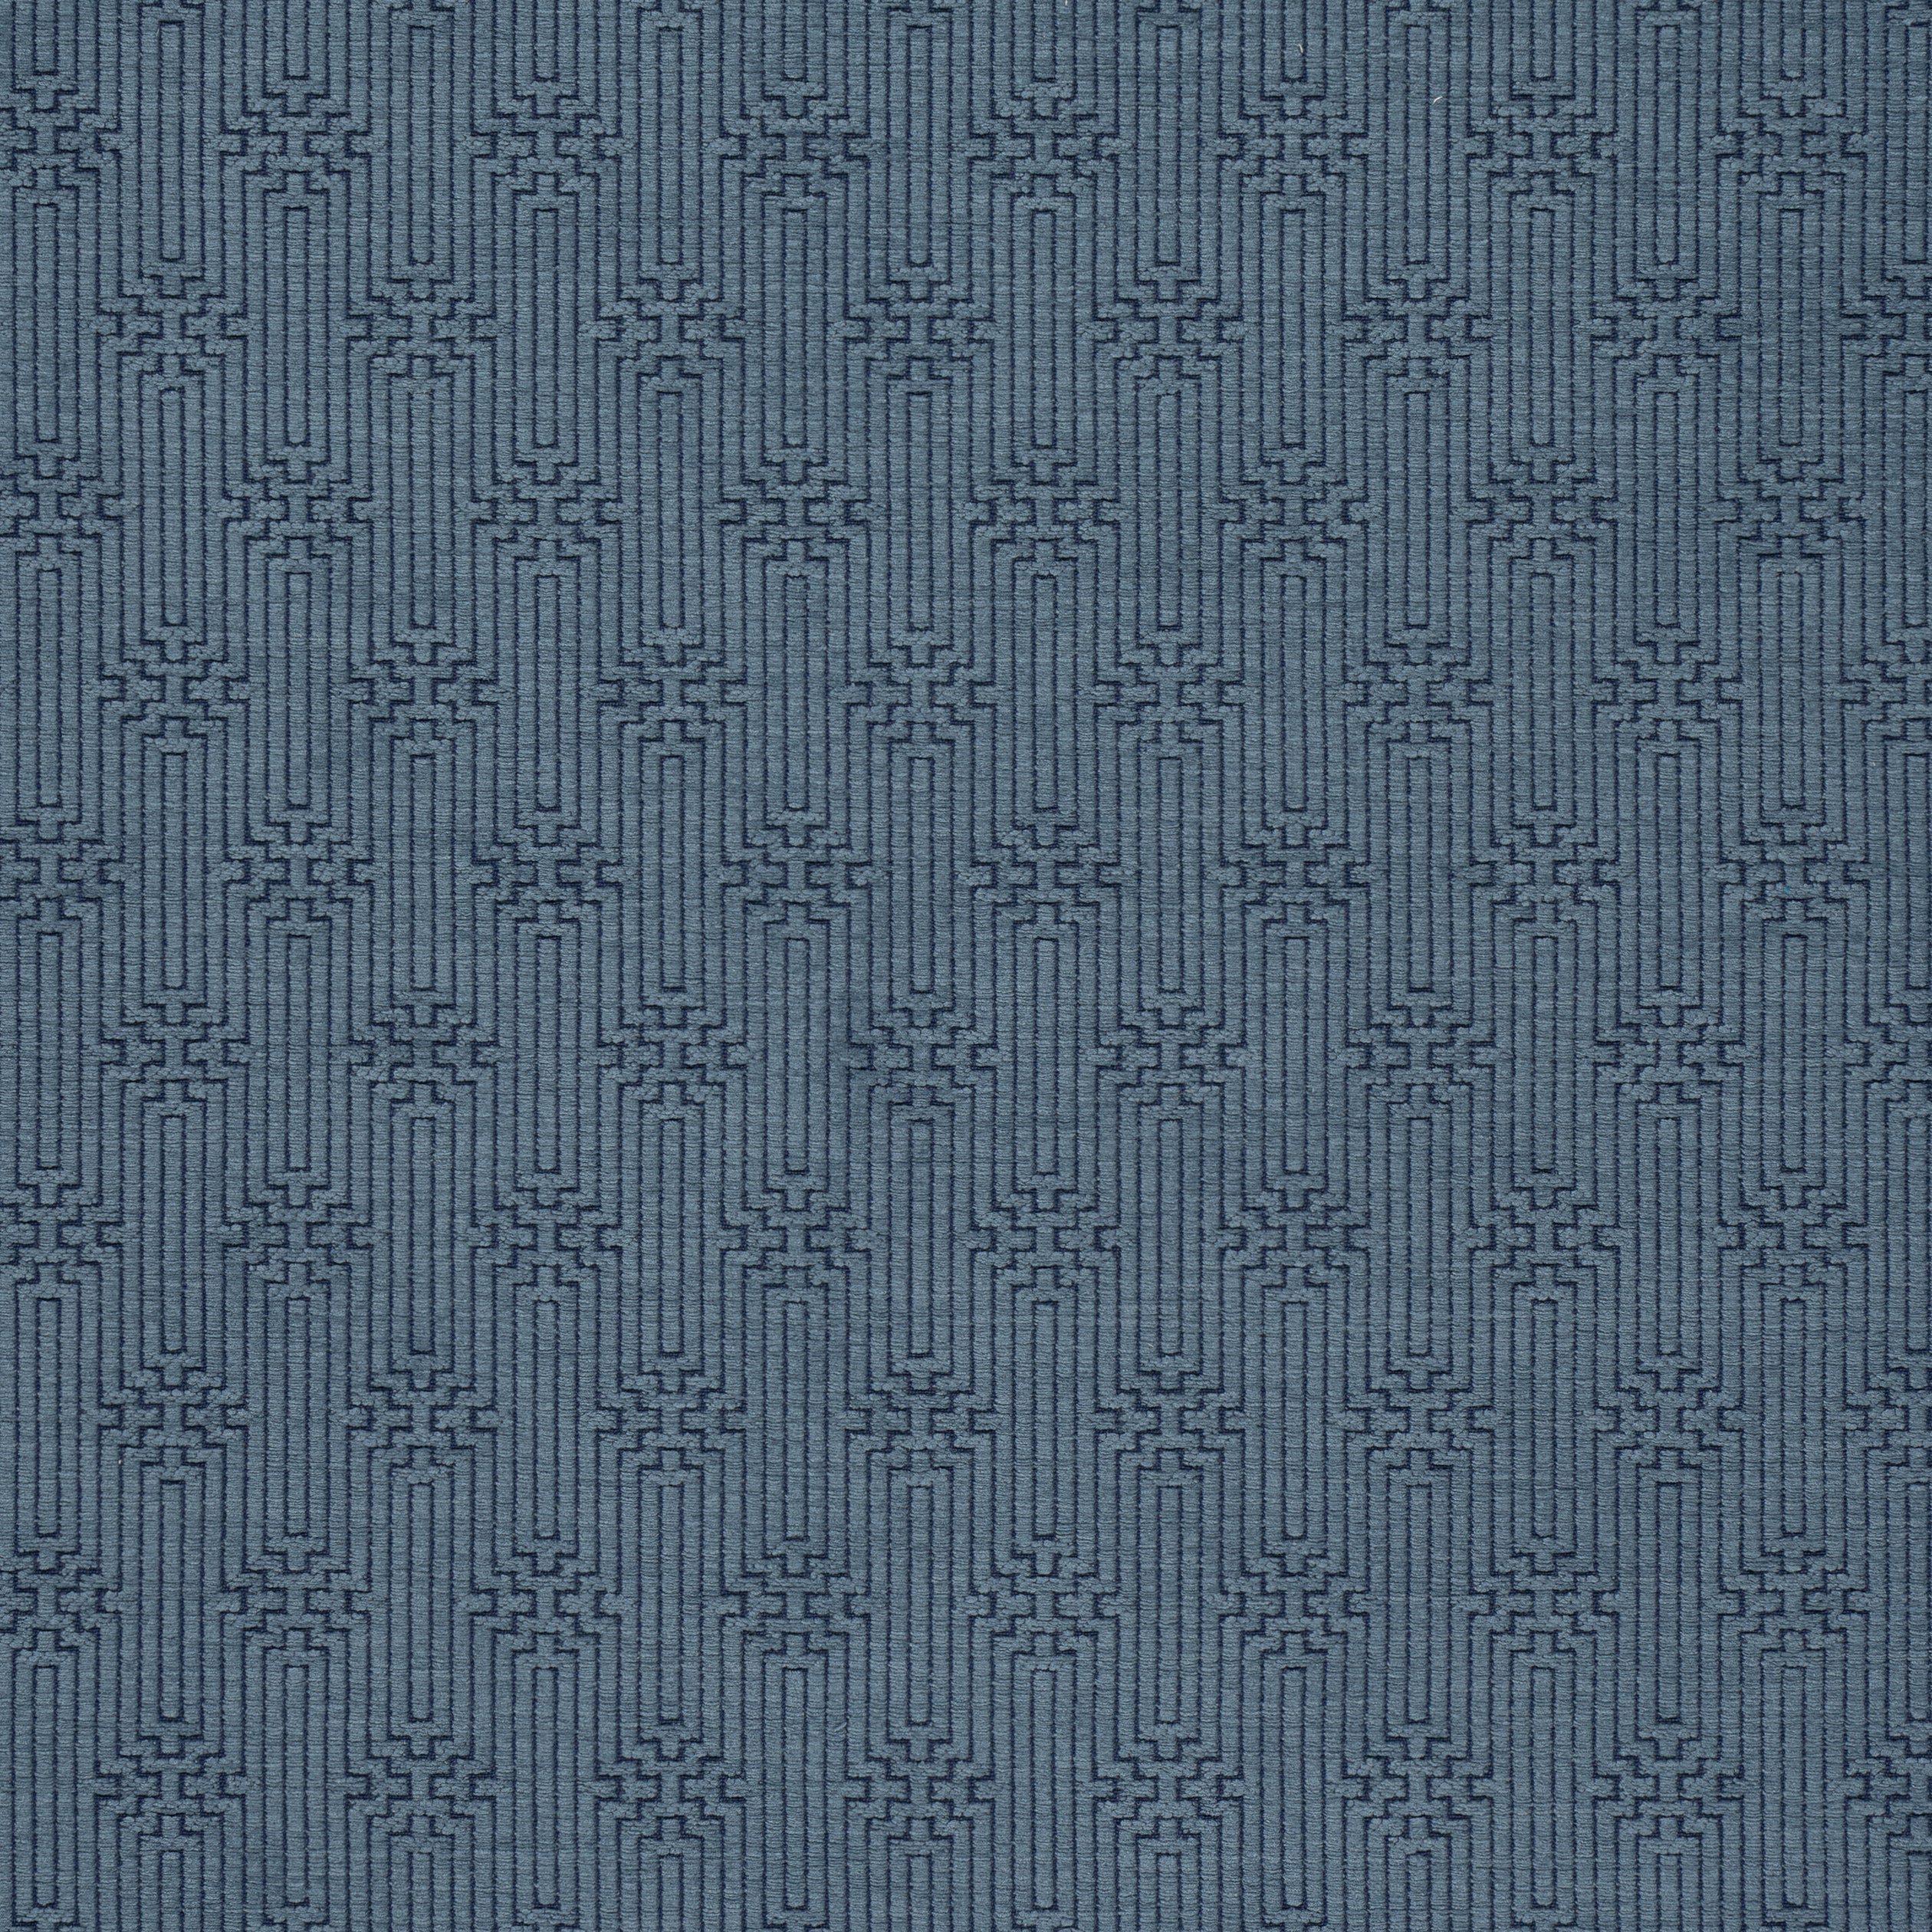 Crete fabric in lake color - pattern number W74210 - by Thibaut in the Passage collection